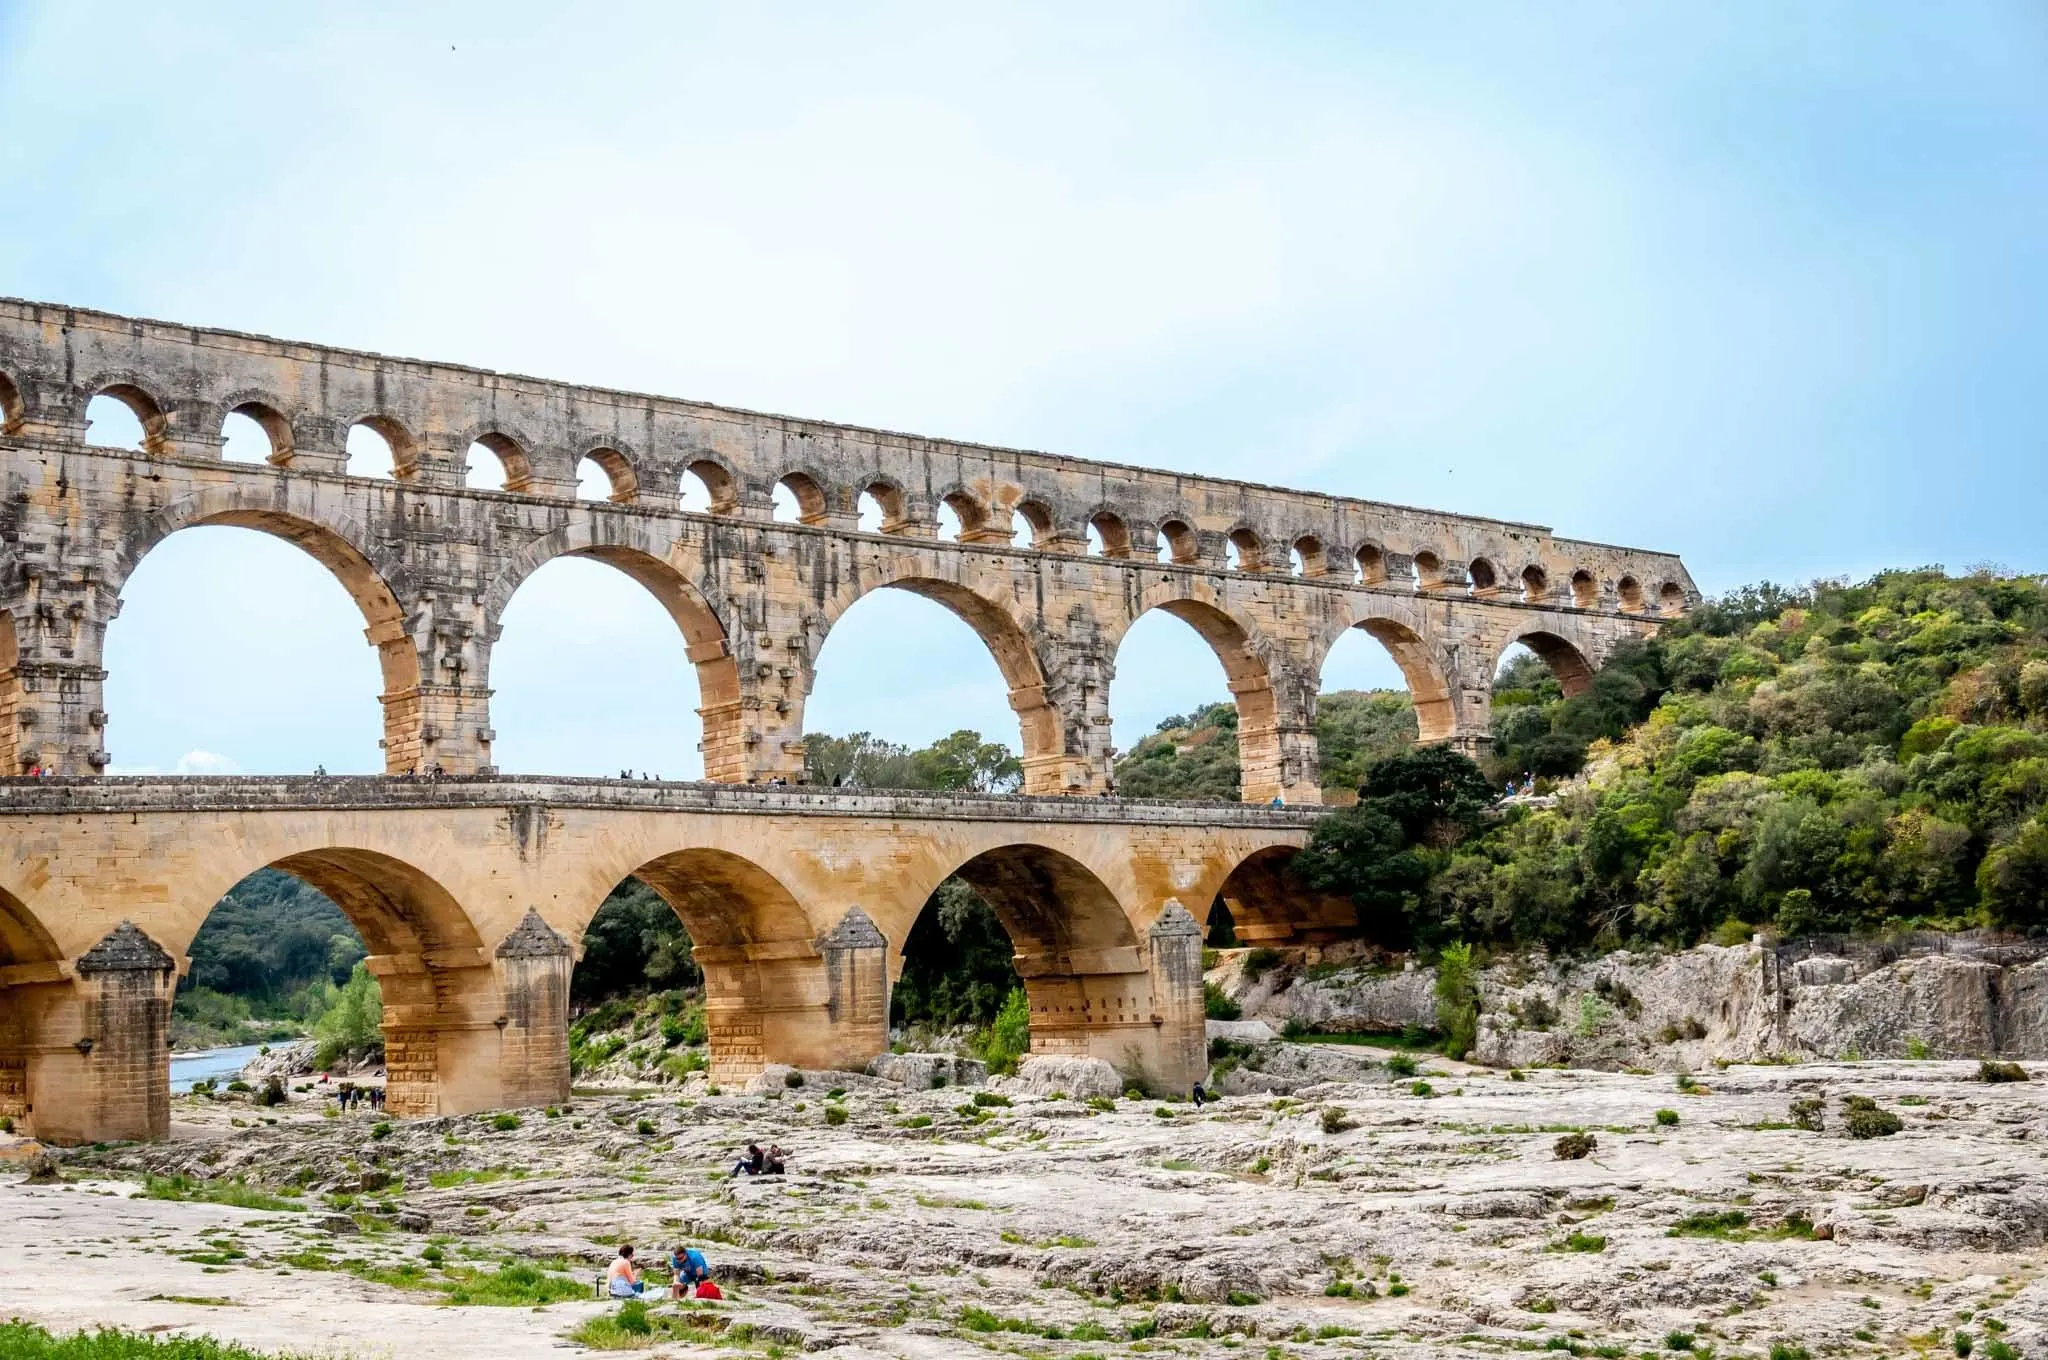 Stone arches of an ancient aqueduct